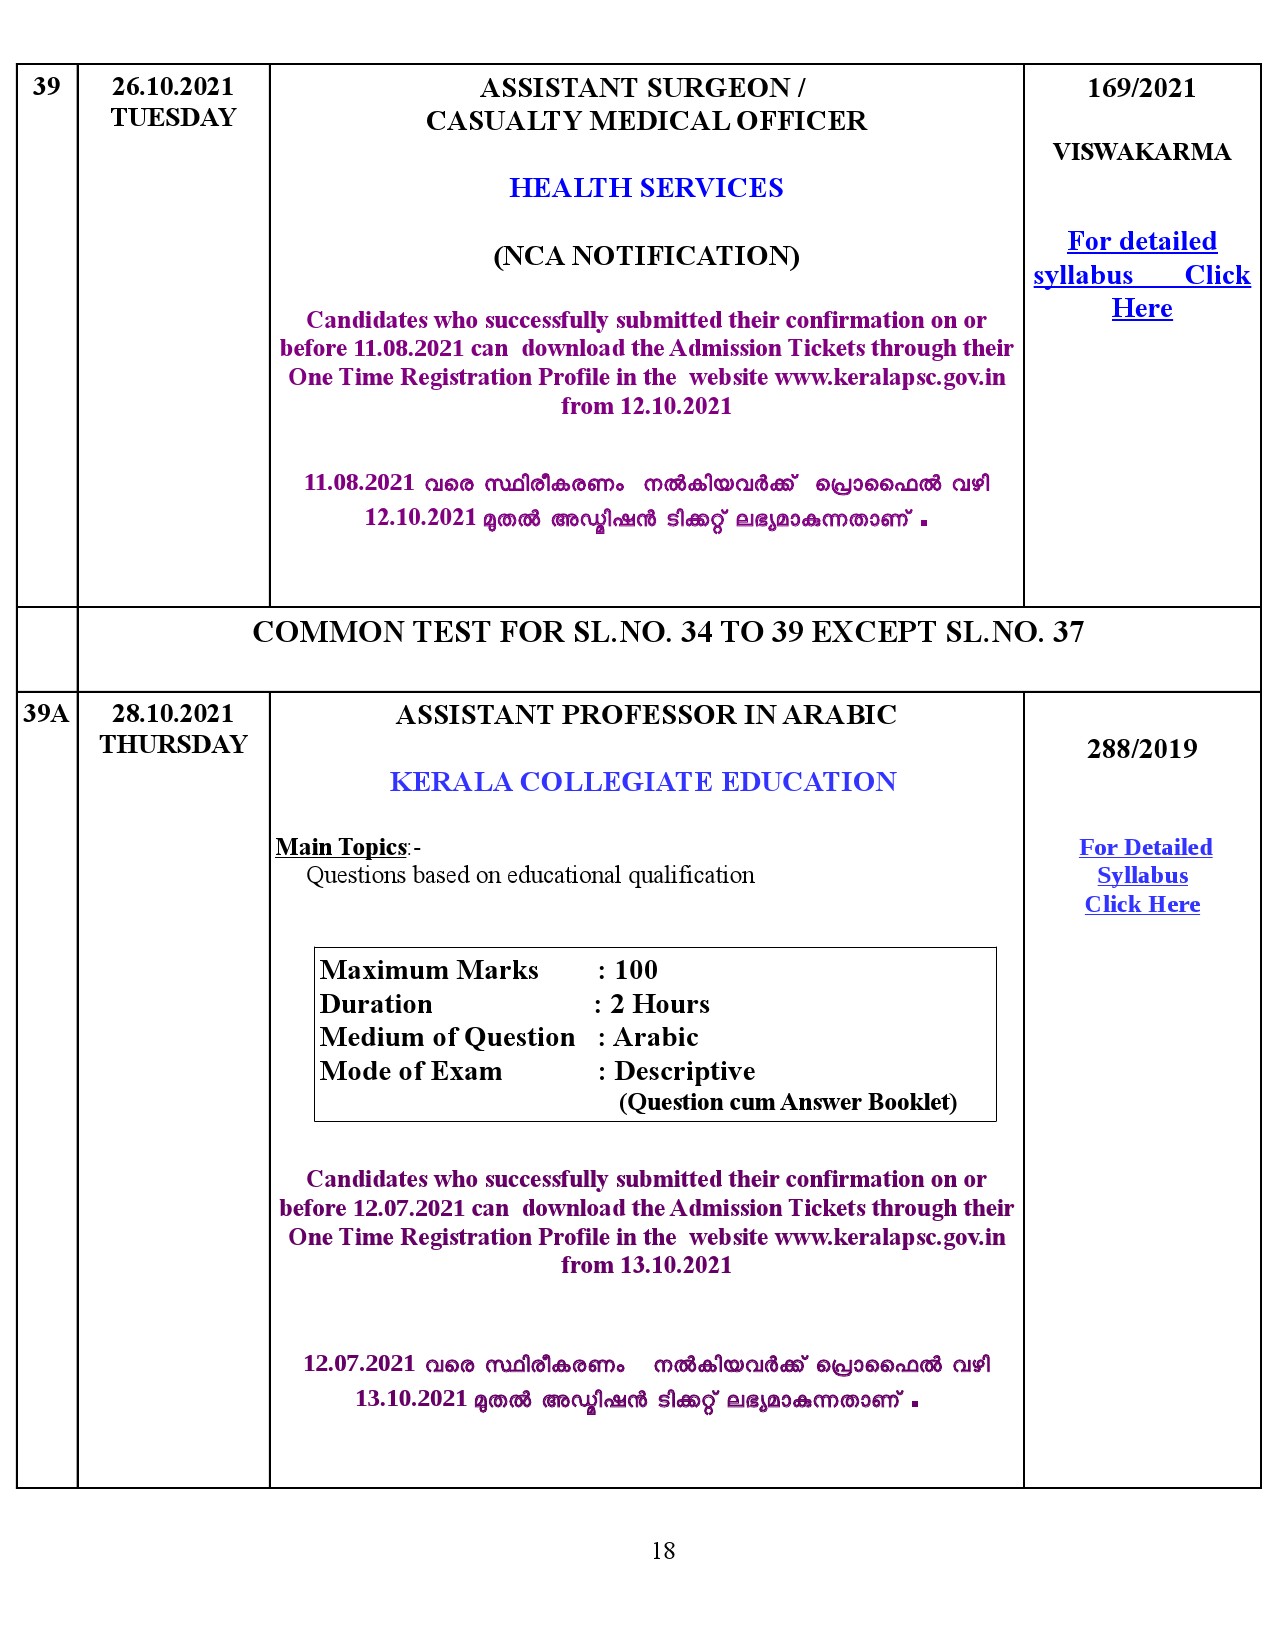 KPSC Modified Examination Programme For The Month Of October 2021 - Notification Image 18